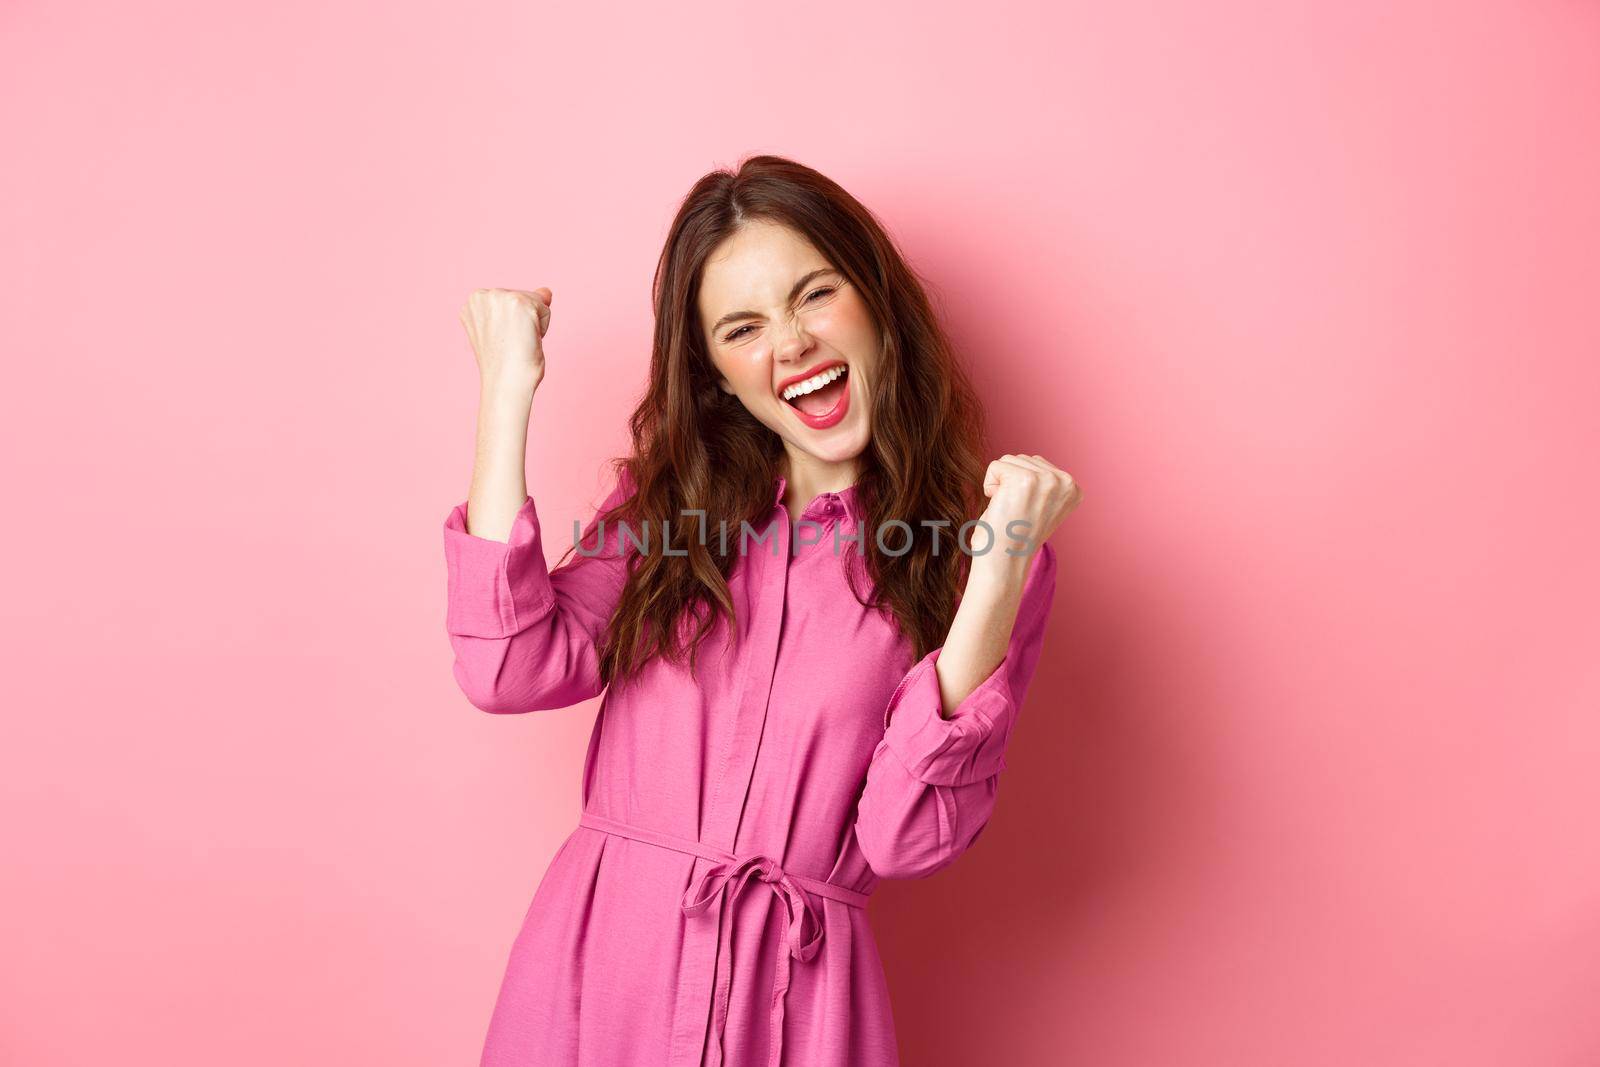 Beautiful smiling woman scream with happy and excited face, saying yes, making fist pump, winning and feeling like champion, triumphing, standing over pink background.